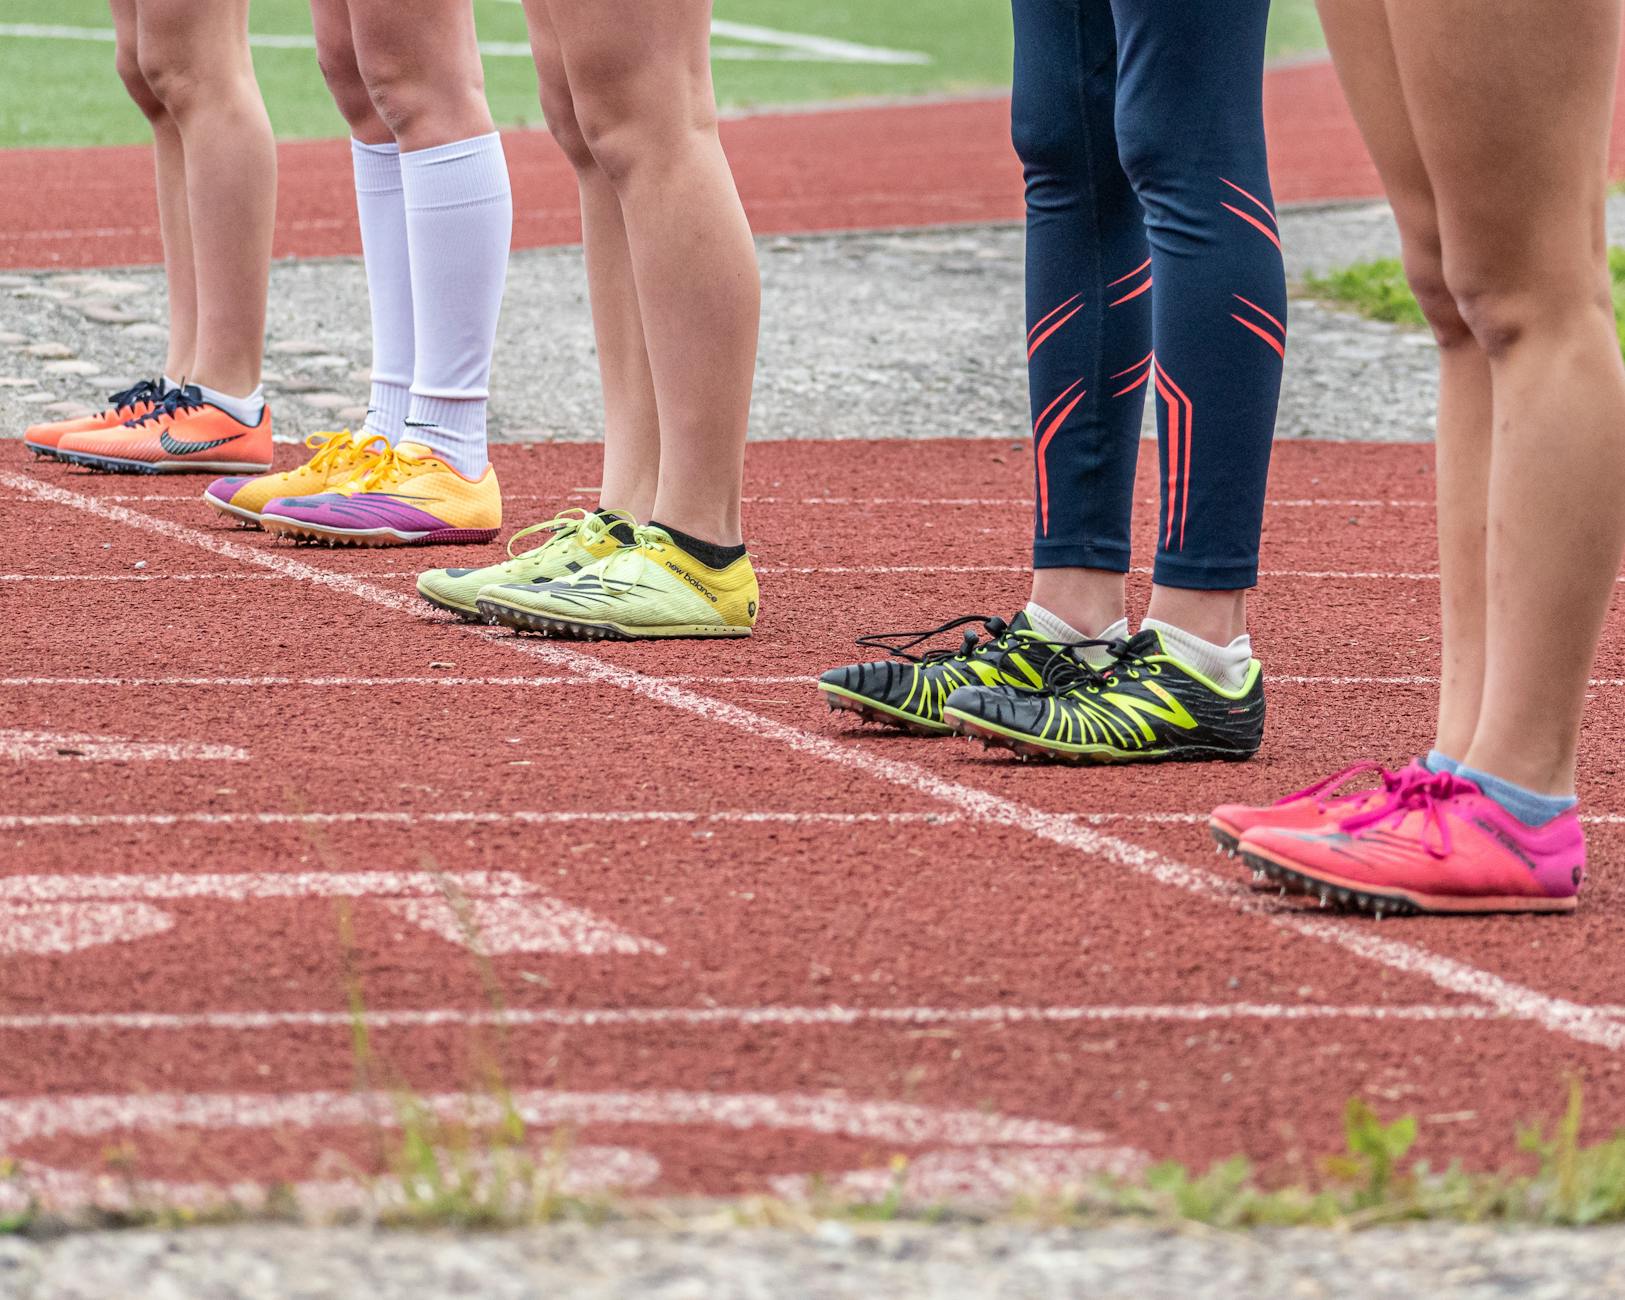 people wearing running shoes standing on the track